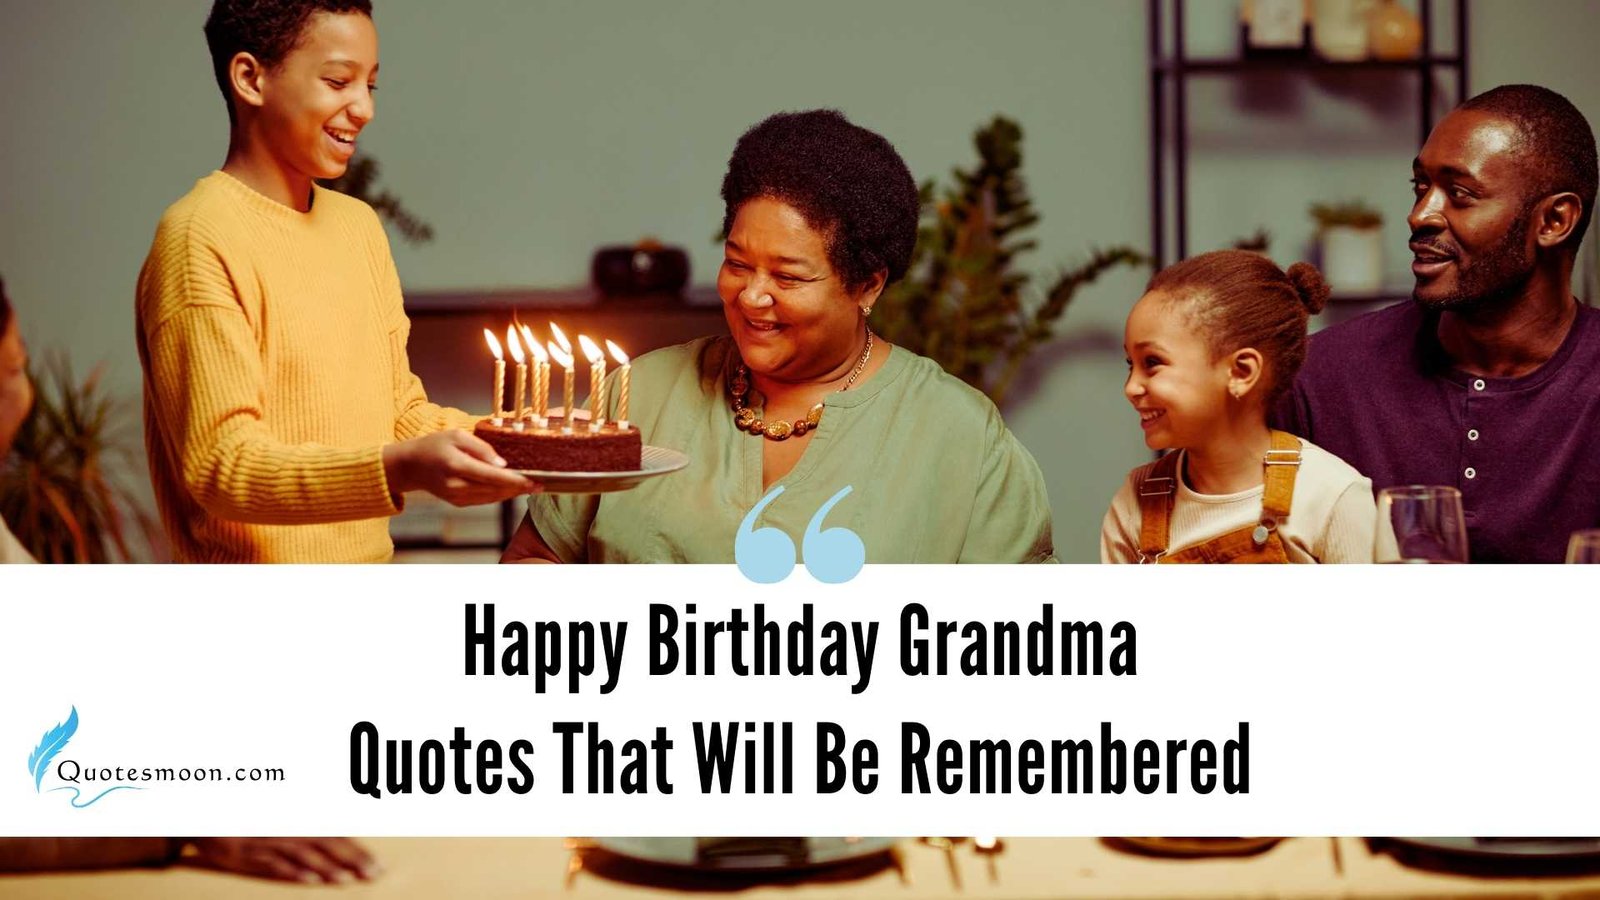 Happy Birthday Grandma Quotes That Will Be Remembered